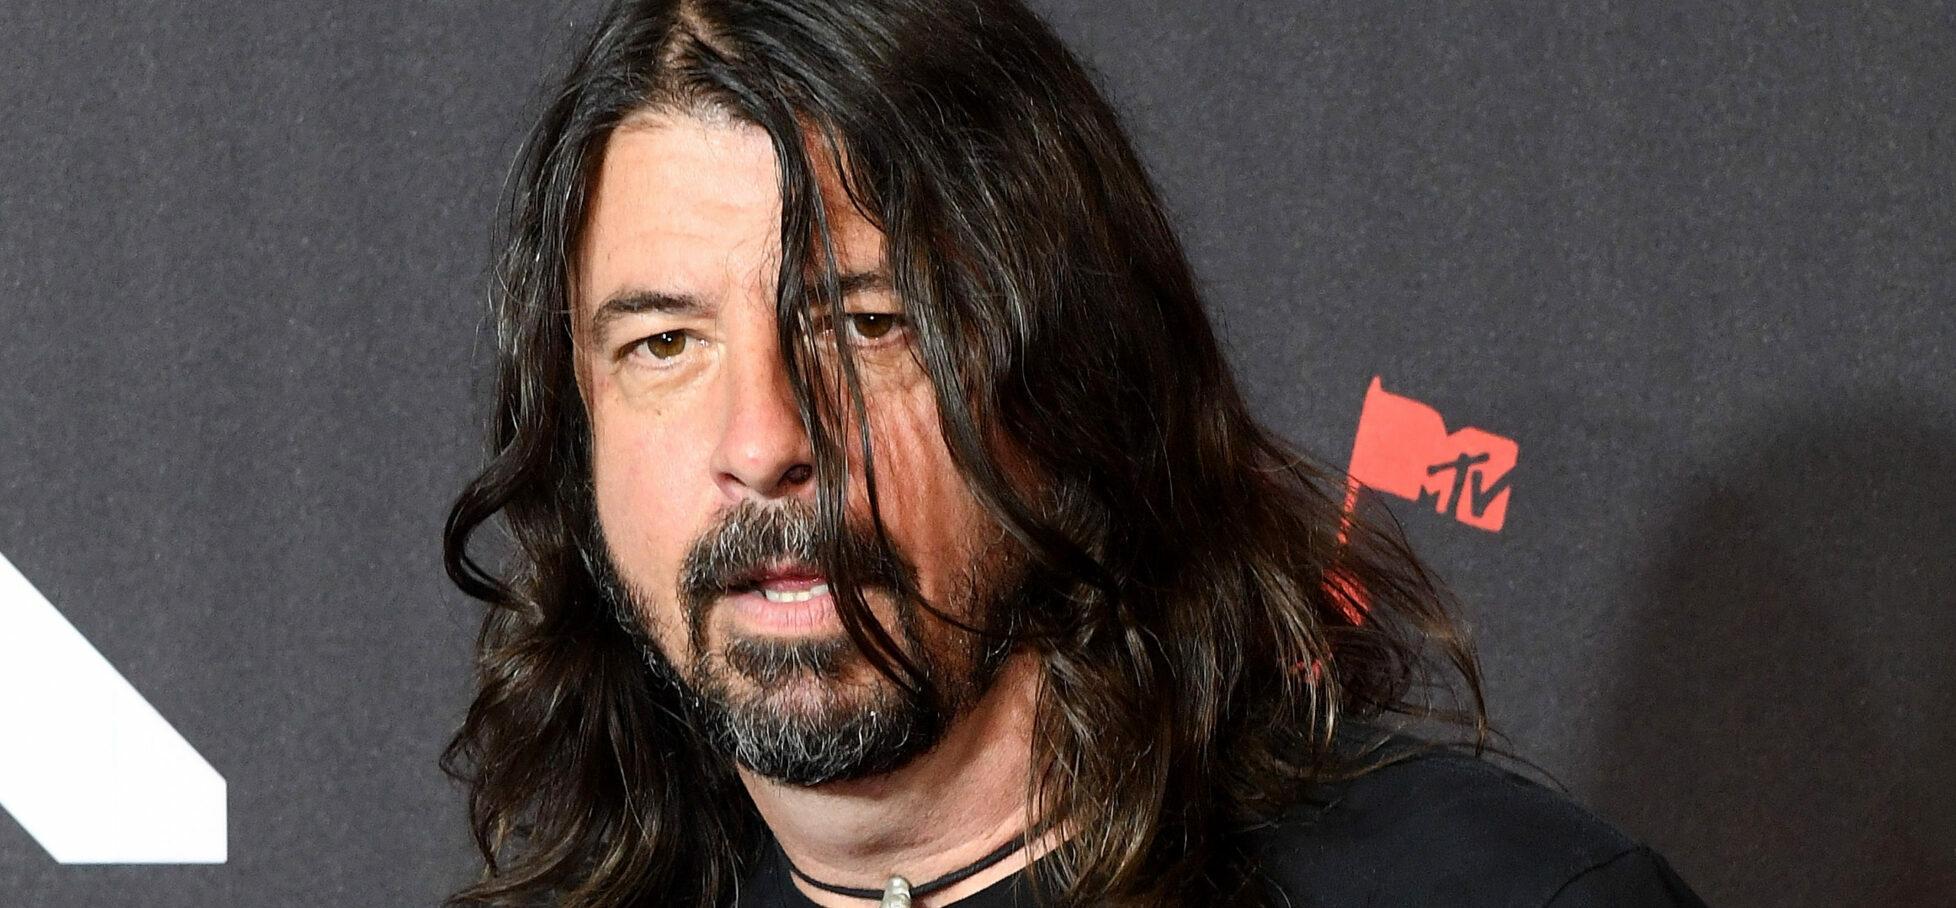 Dave Grohl Opens Up About Hearing Loss: ‘I Can’t Hear What You’re Saying’